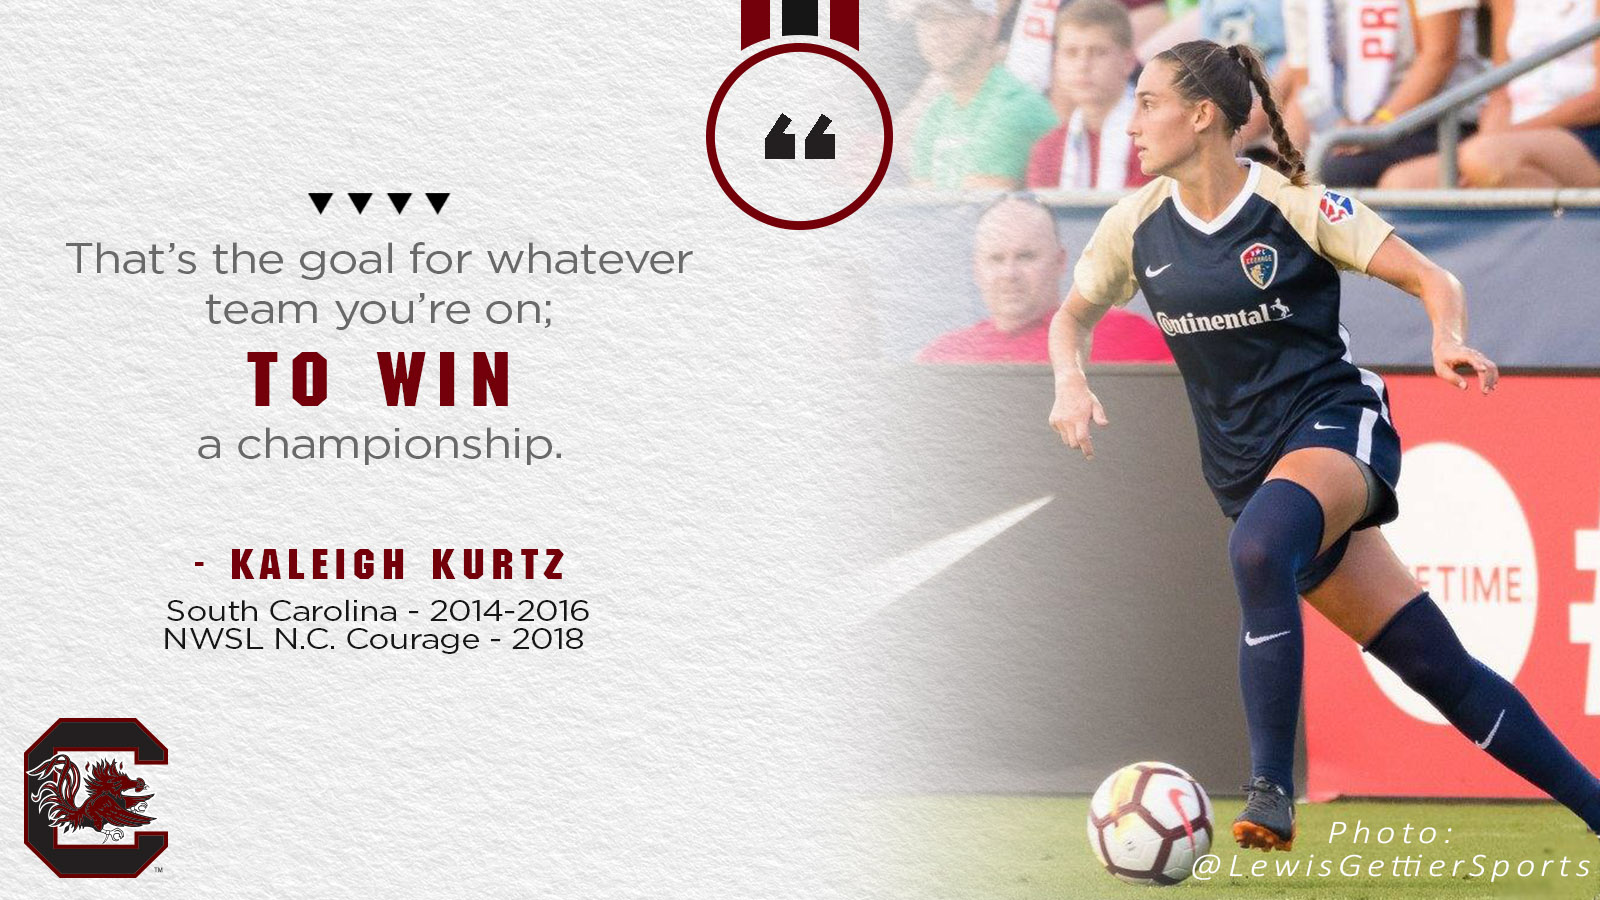 Kurtz is Grateful and Humble in Winning Professional Title